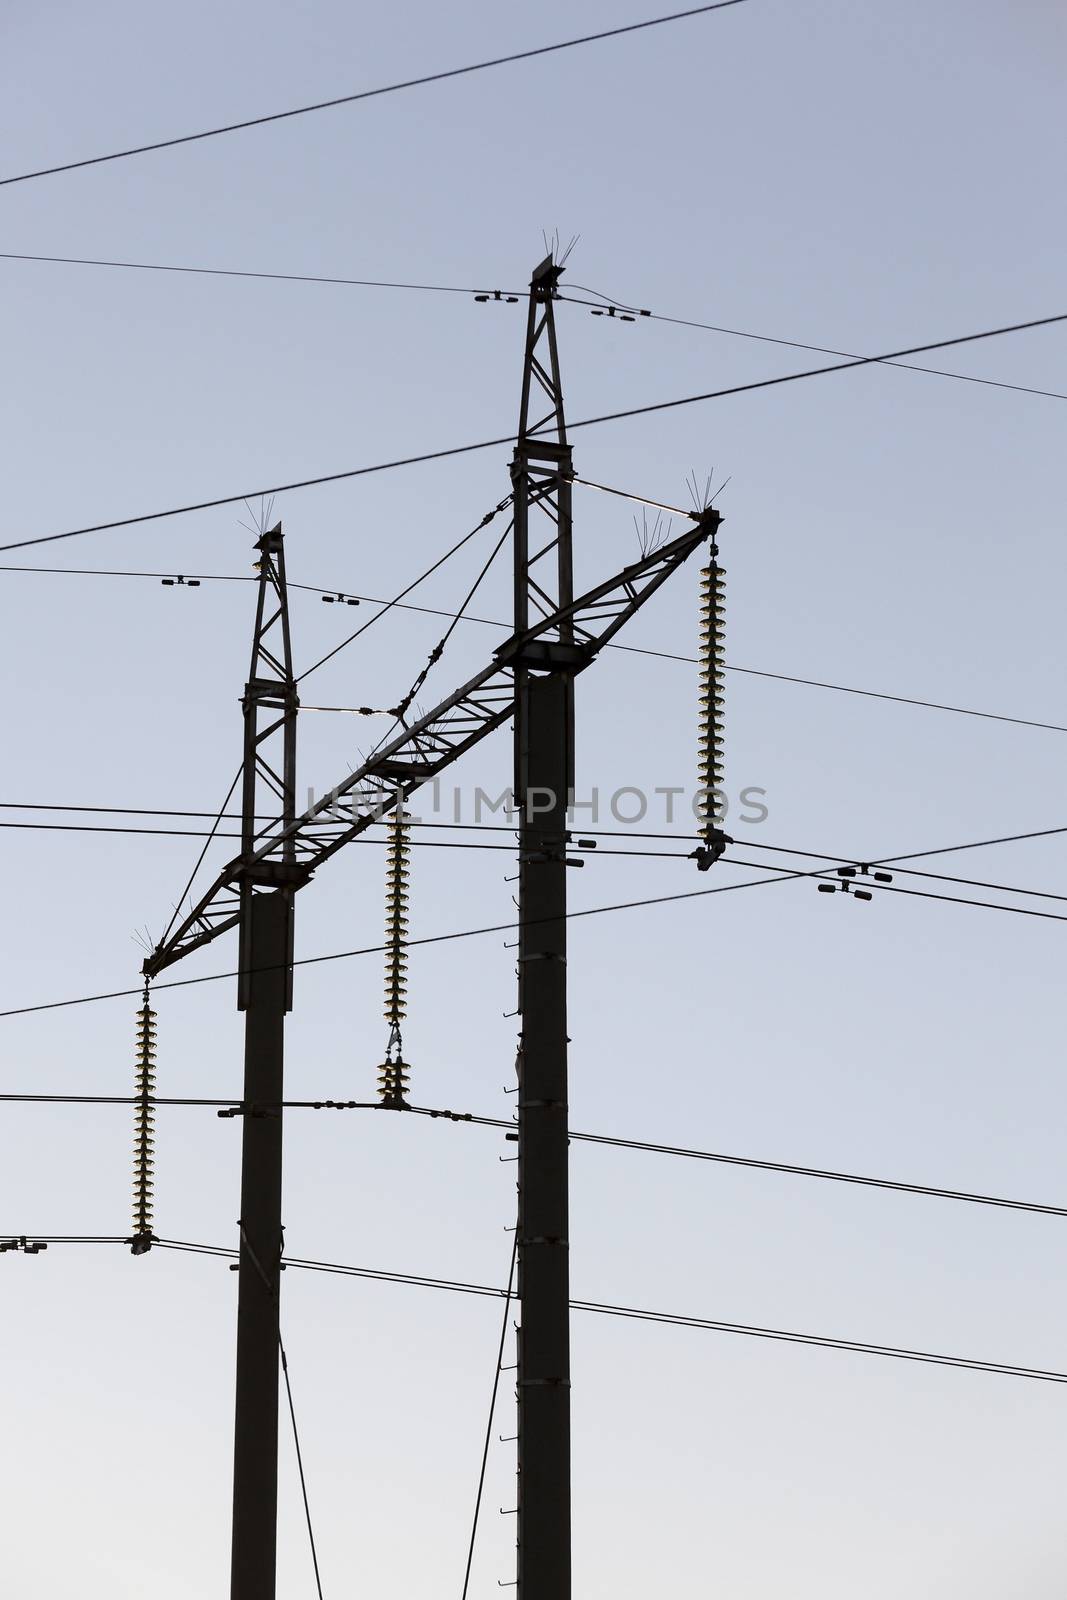 managed to picture the pillars, through which the high-voltage lines, daytime, sky,